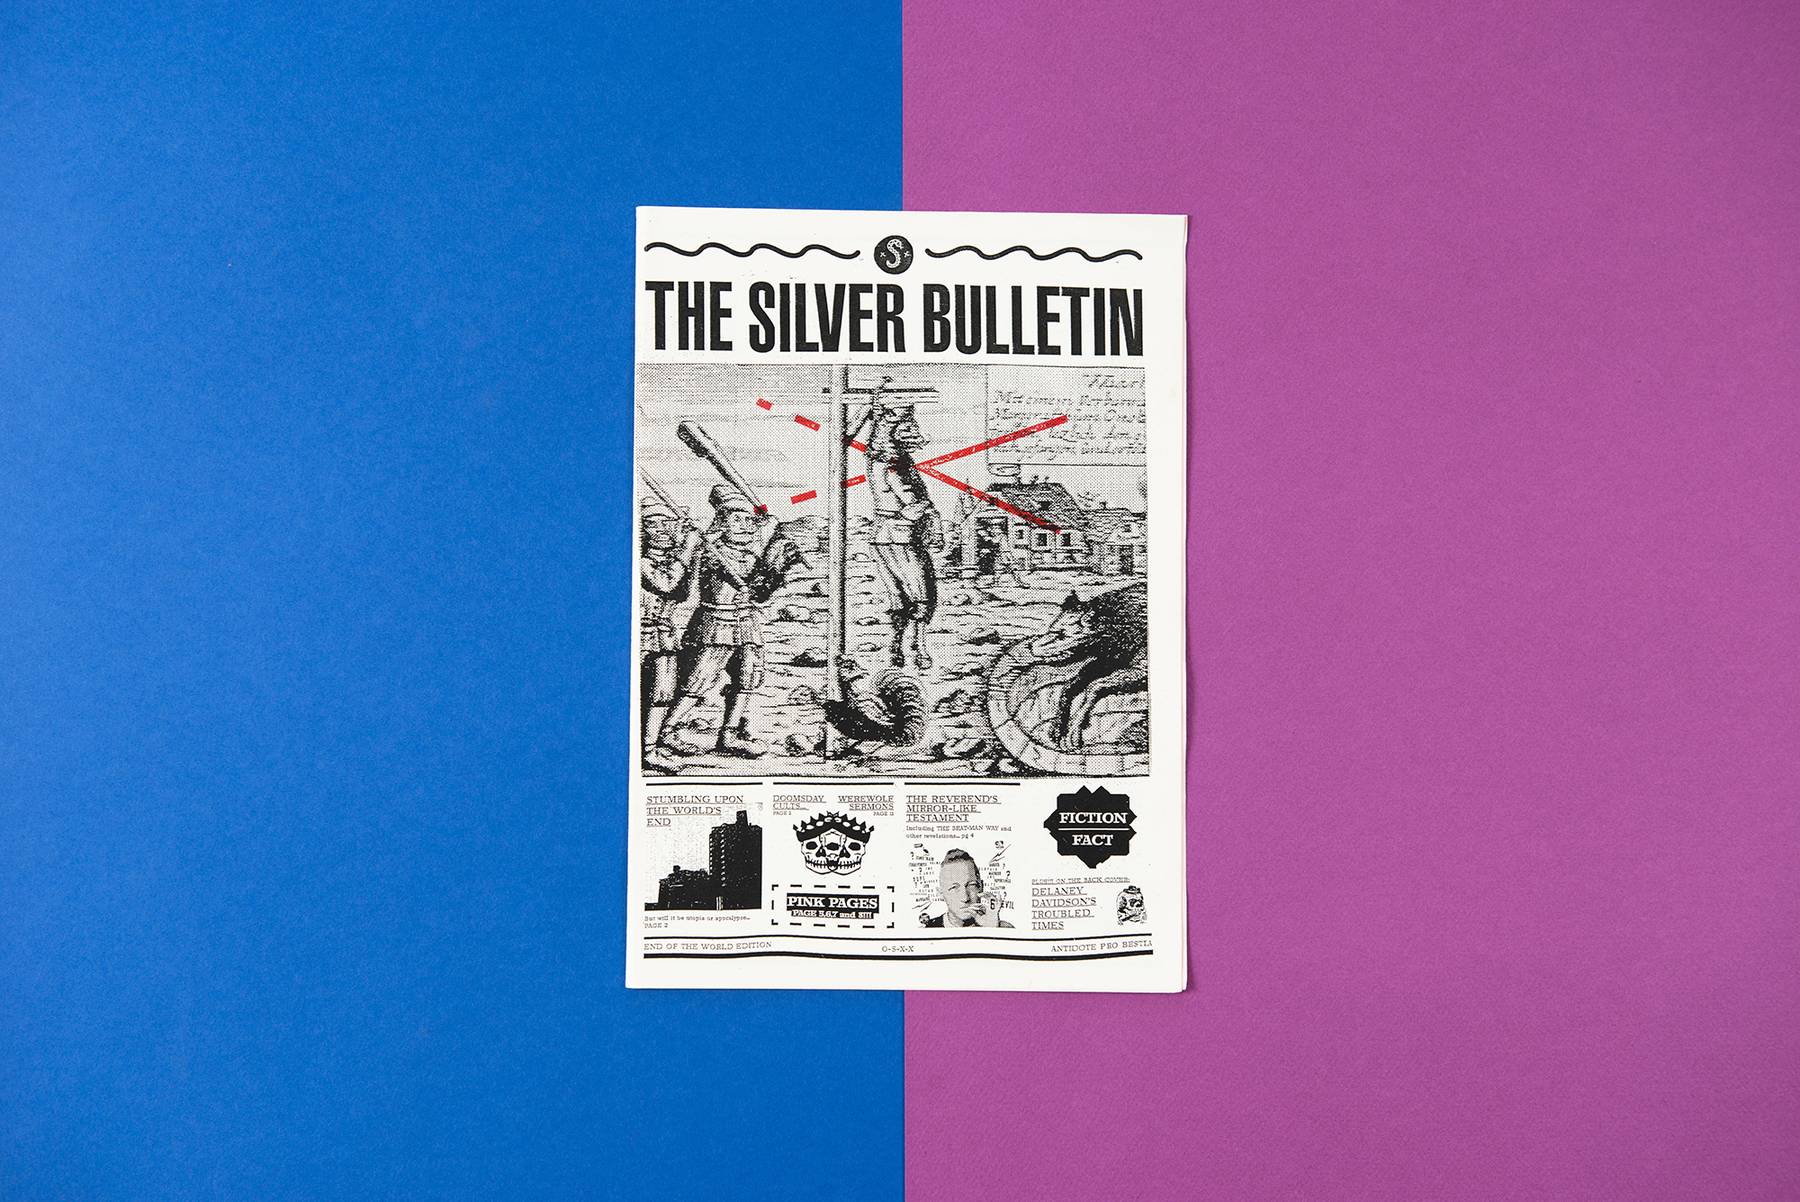 The Silver Bulletin 2011 image